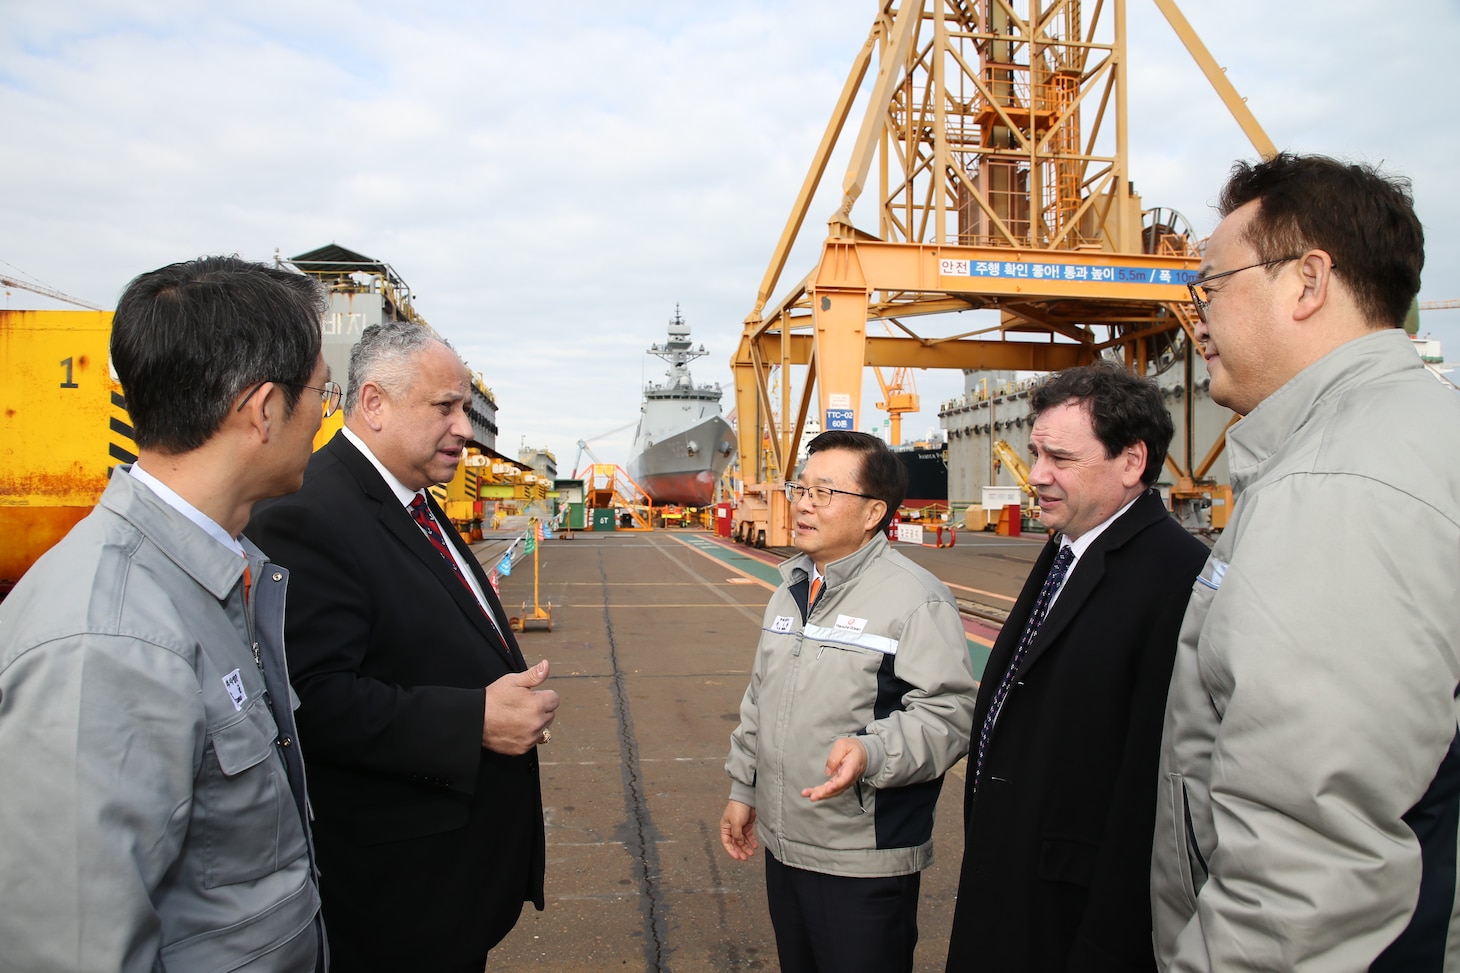 GEOJE, Republic of Korea (Feb. 28, 2024) -- Secretary of the Navy Carlos Del Toro visits Hanwha Ocean shipyard in Geoje, Republic of Korea, Feb. 27, 2024. Secretary Del Toro traveled to the Indo-Pacific to meet with allies and partners to further maritime cooperation, explore opportunities to collaborate with the Republic of Korea and Japan on commercial and Naval shipbuilding, and engage with Sailors, Marines, and Department of the Navy civilians forward deployed to the region. (Hanwha Ocean photo/released)